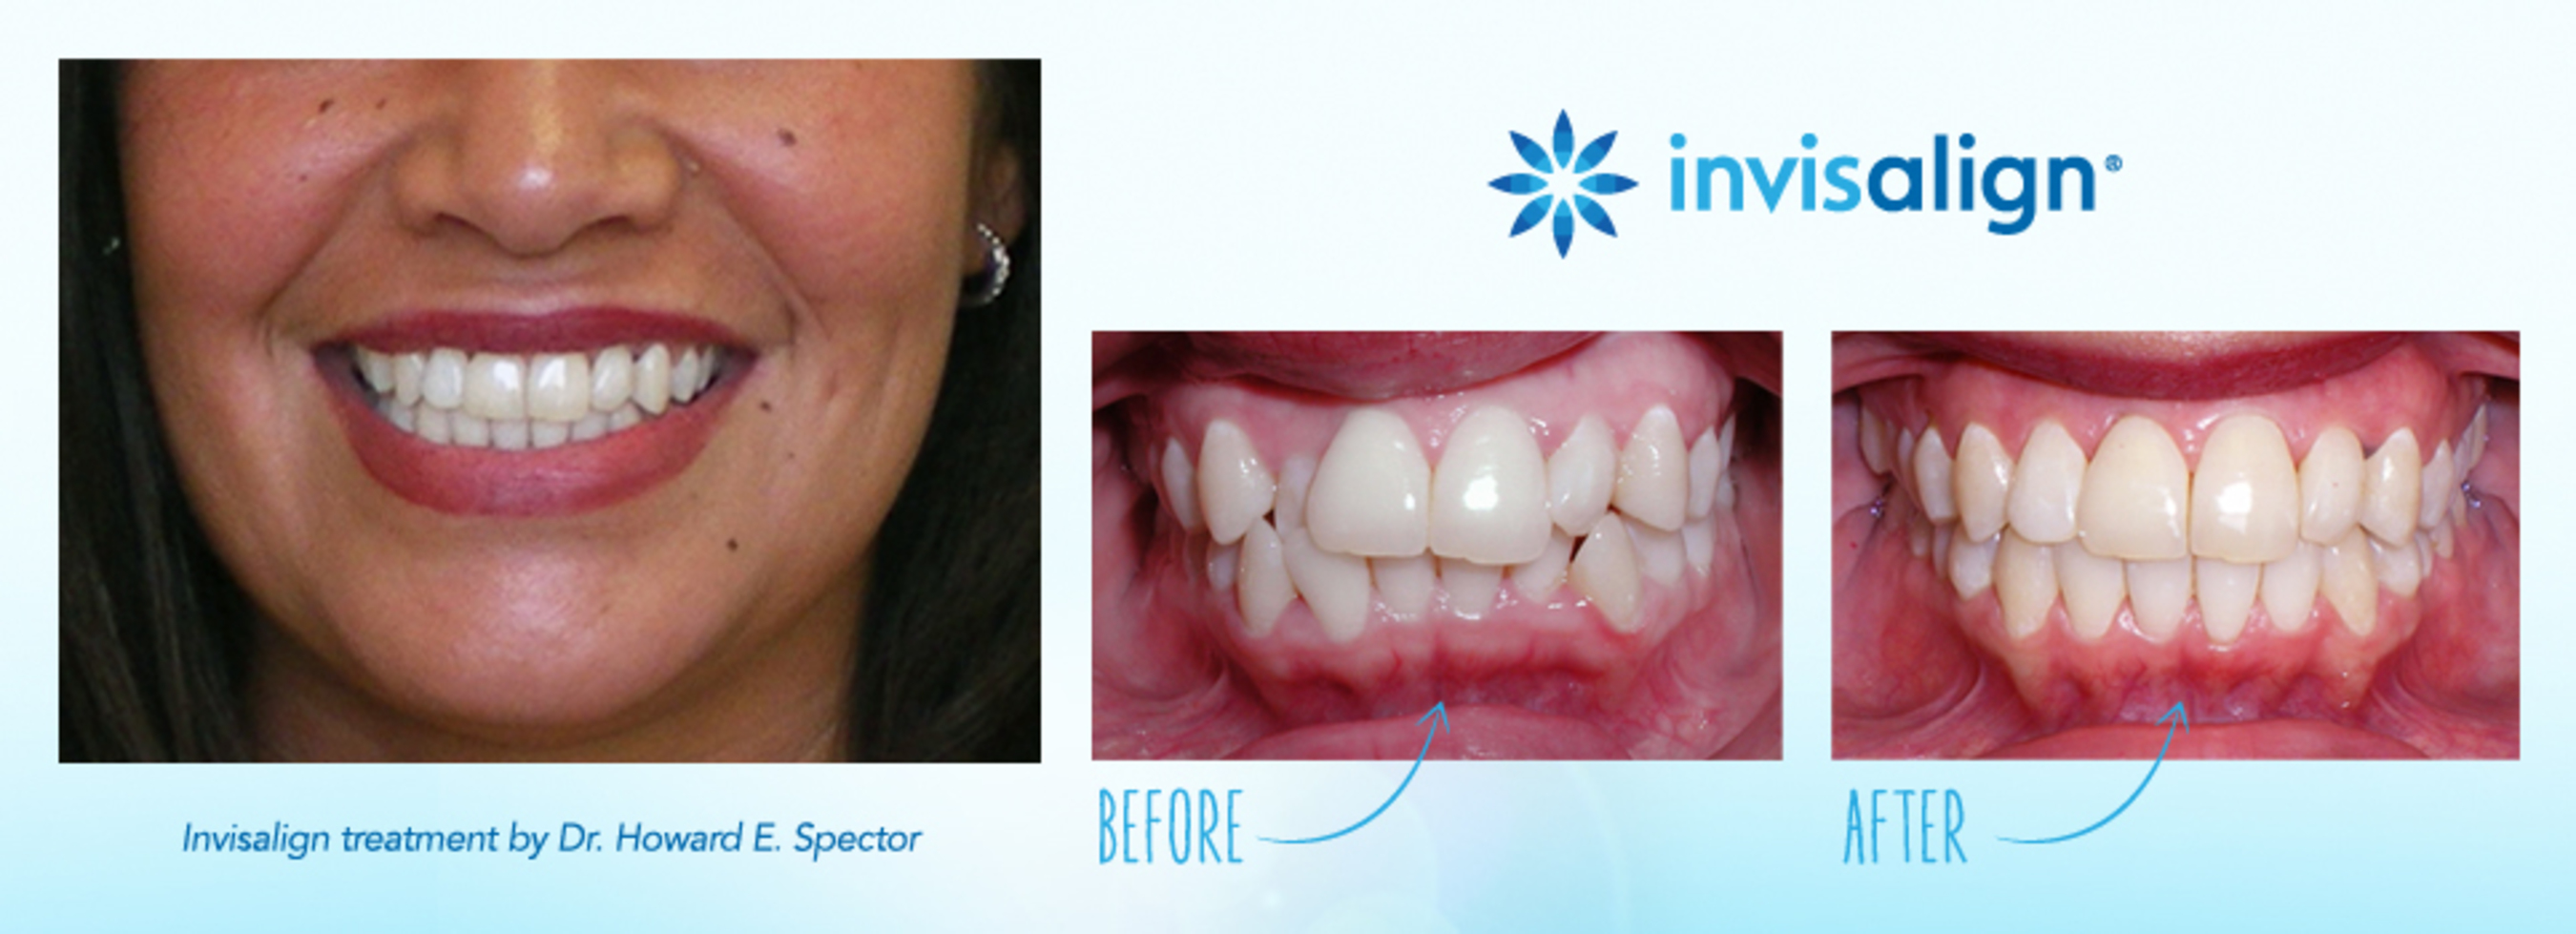 Invisalign treatment by Dr. Howard E. Spector - Treatment duration: 16 months - Disclaimer: The images are presented for reference purposes only and are not intended to represent the actual results a future Invisalign patient will achieve. Treatment times and results will vary by patient. (PRNewsFoto/Invisalign)